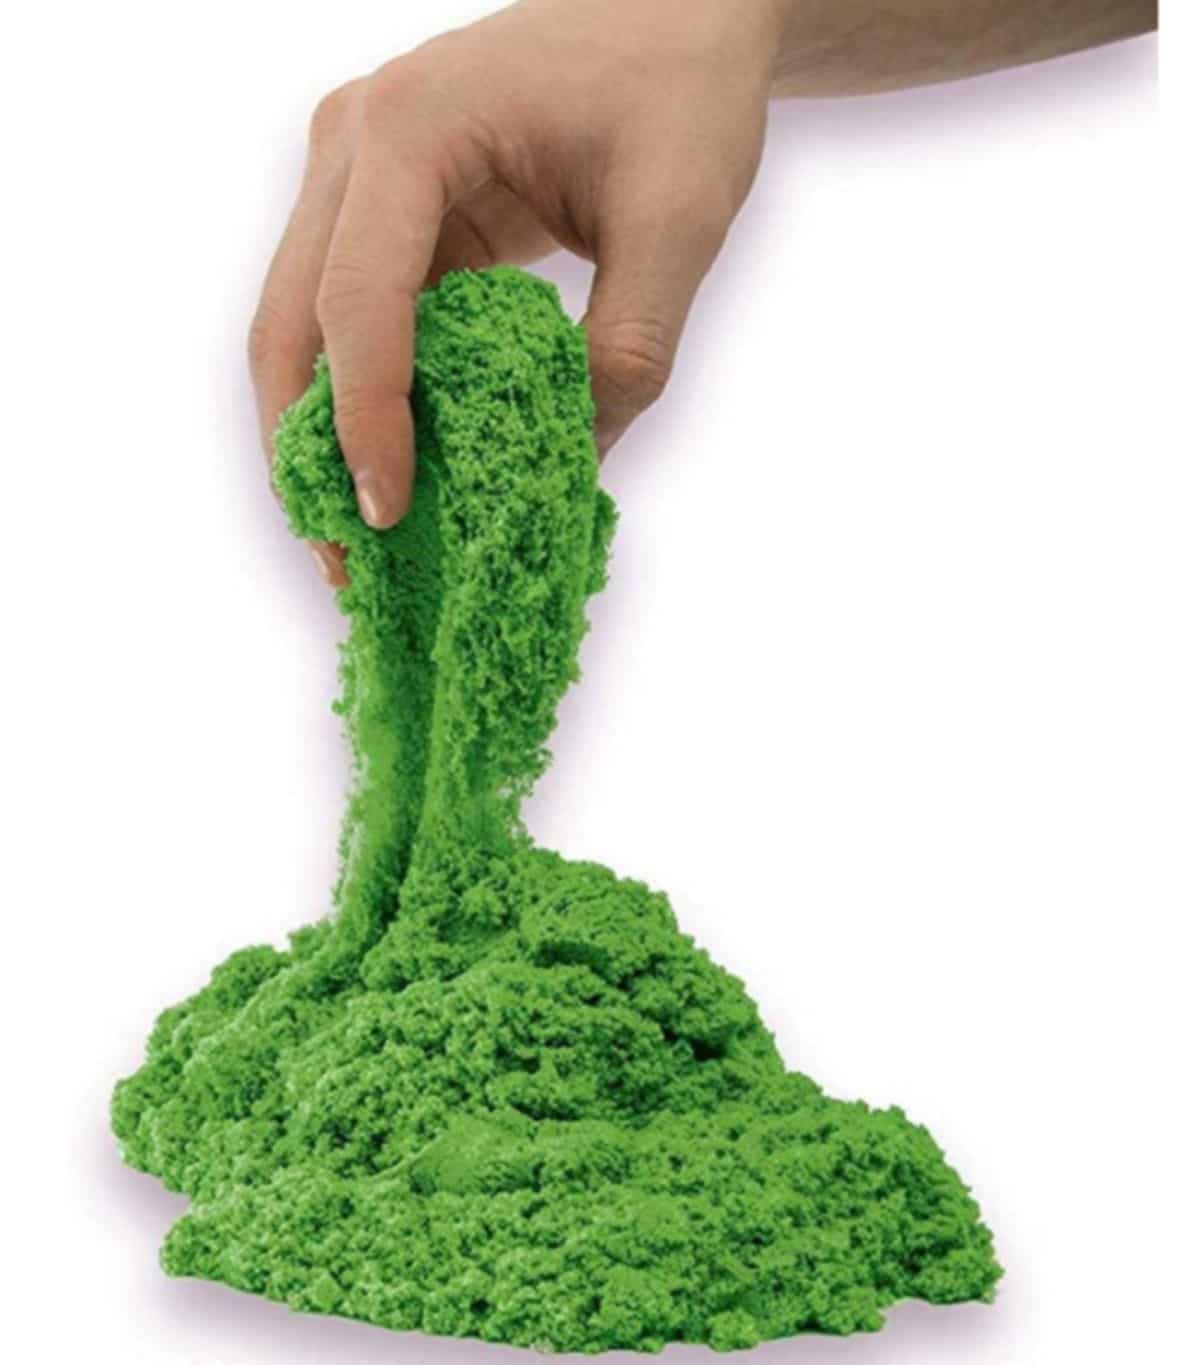 a hand pulls some green kinetic sand out of a pile